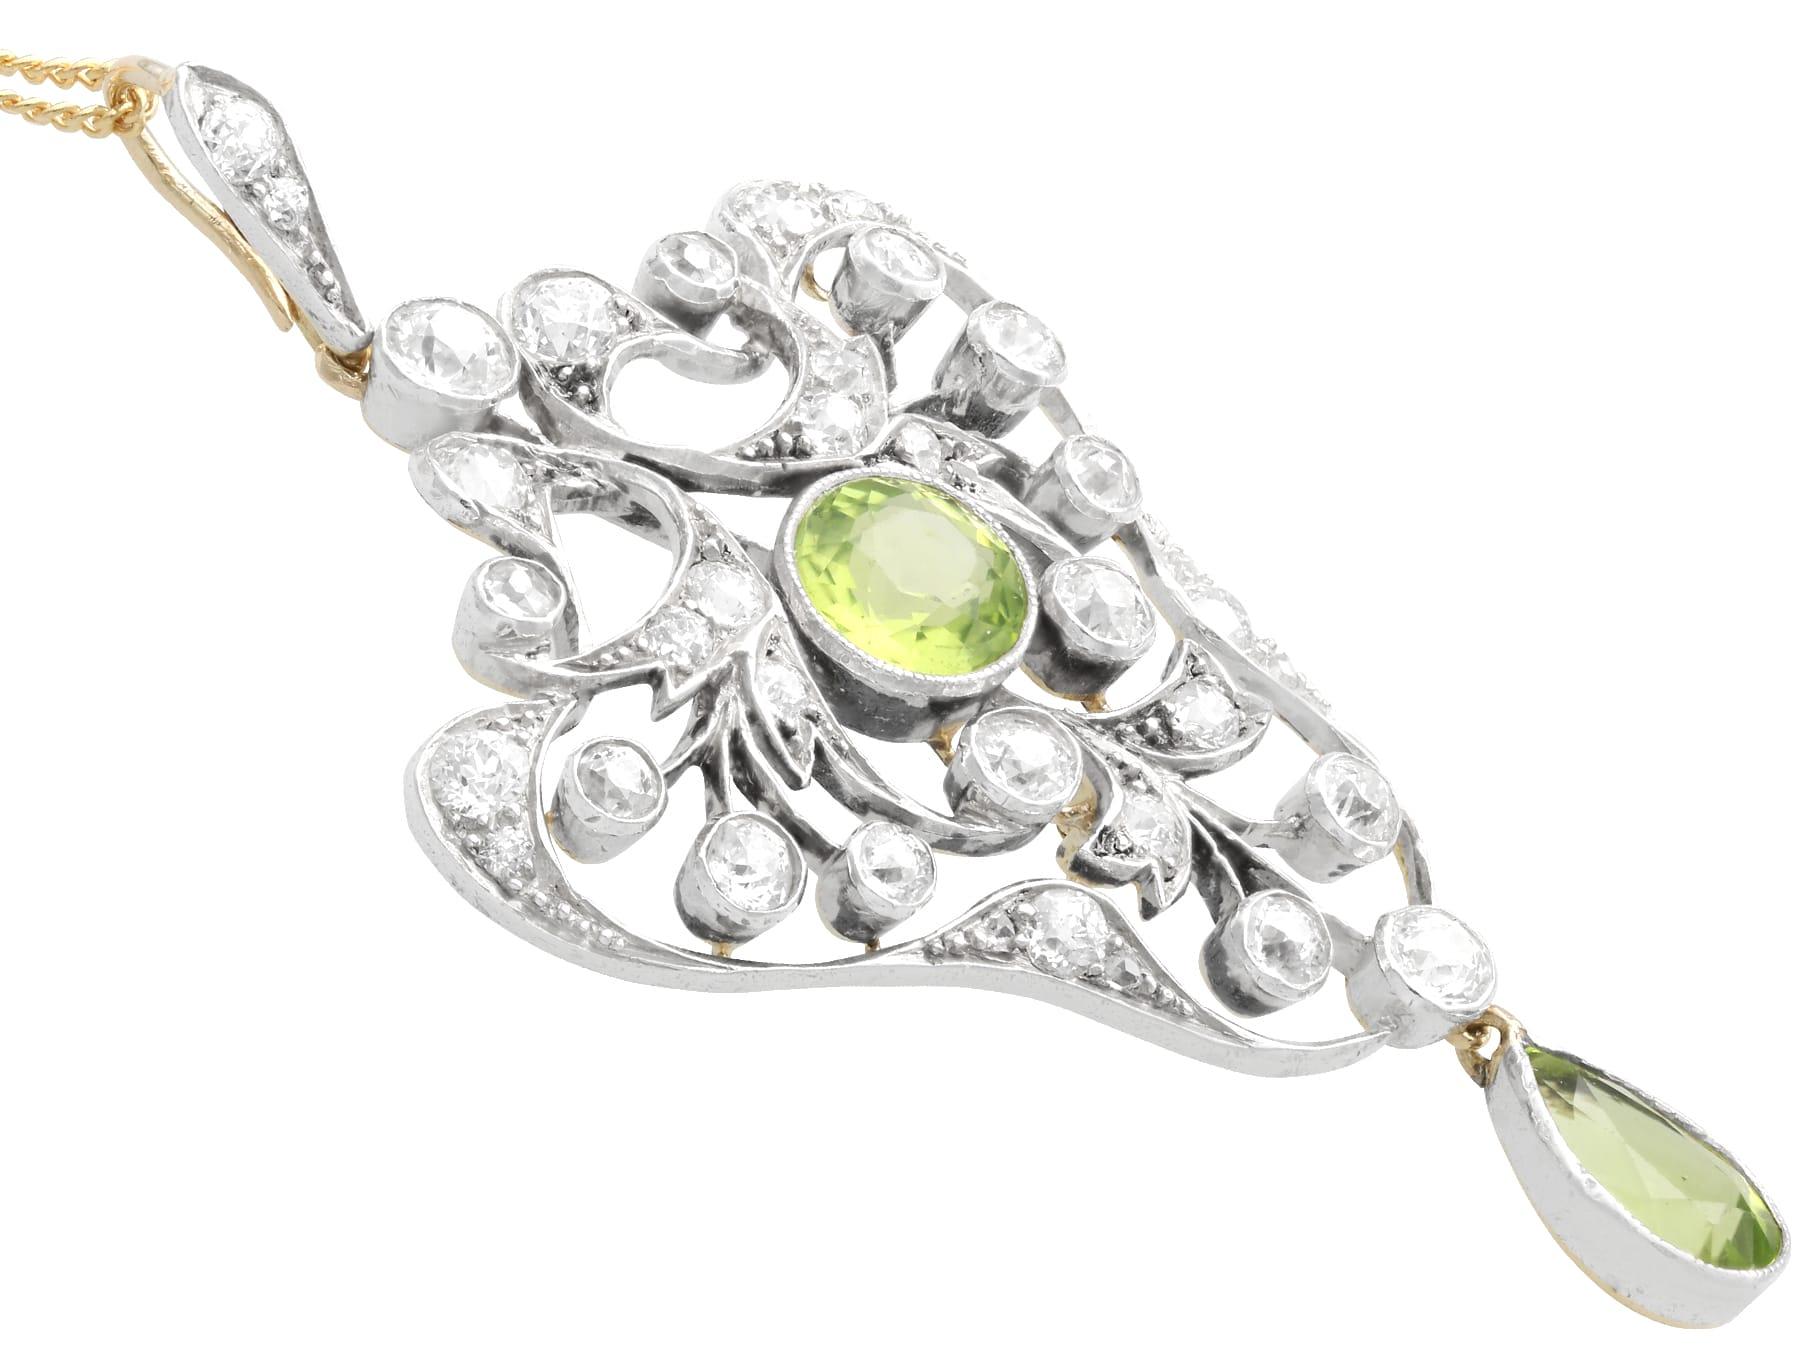 Antique 3.02Ct Peridot and 3.41Ct Diamond, 14k Yellow Gold Pendant / Brooch In Excellent Condition For Sale In Jesmond, Newcastle Upon Tyne